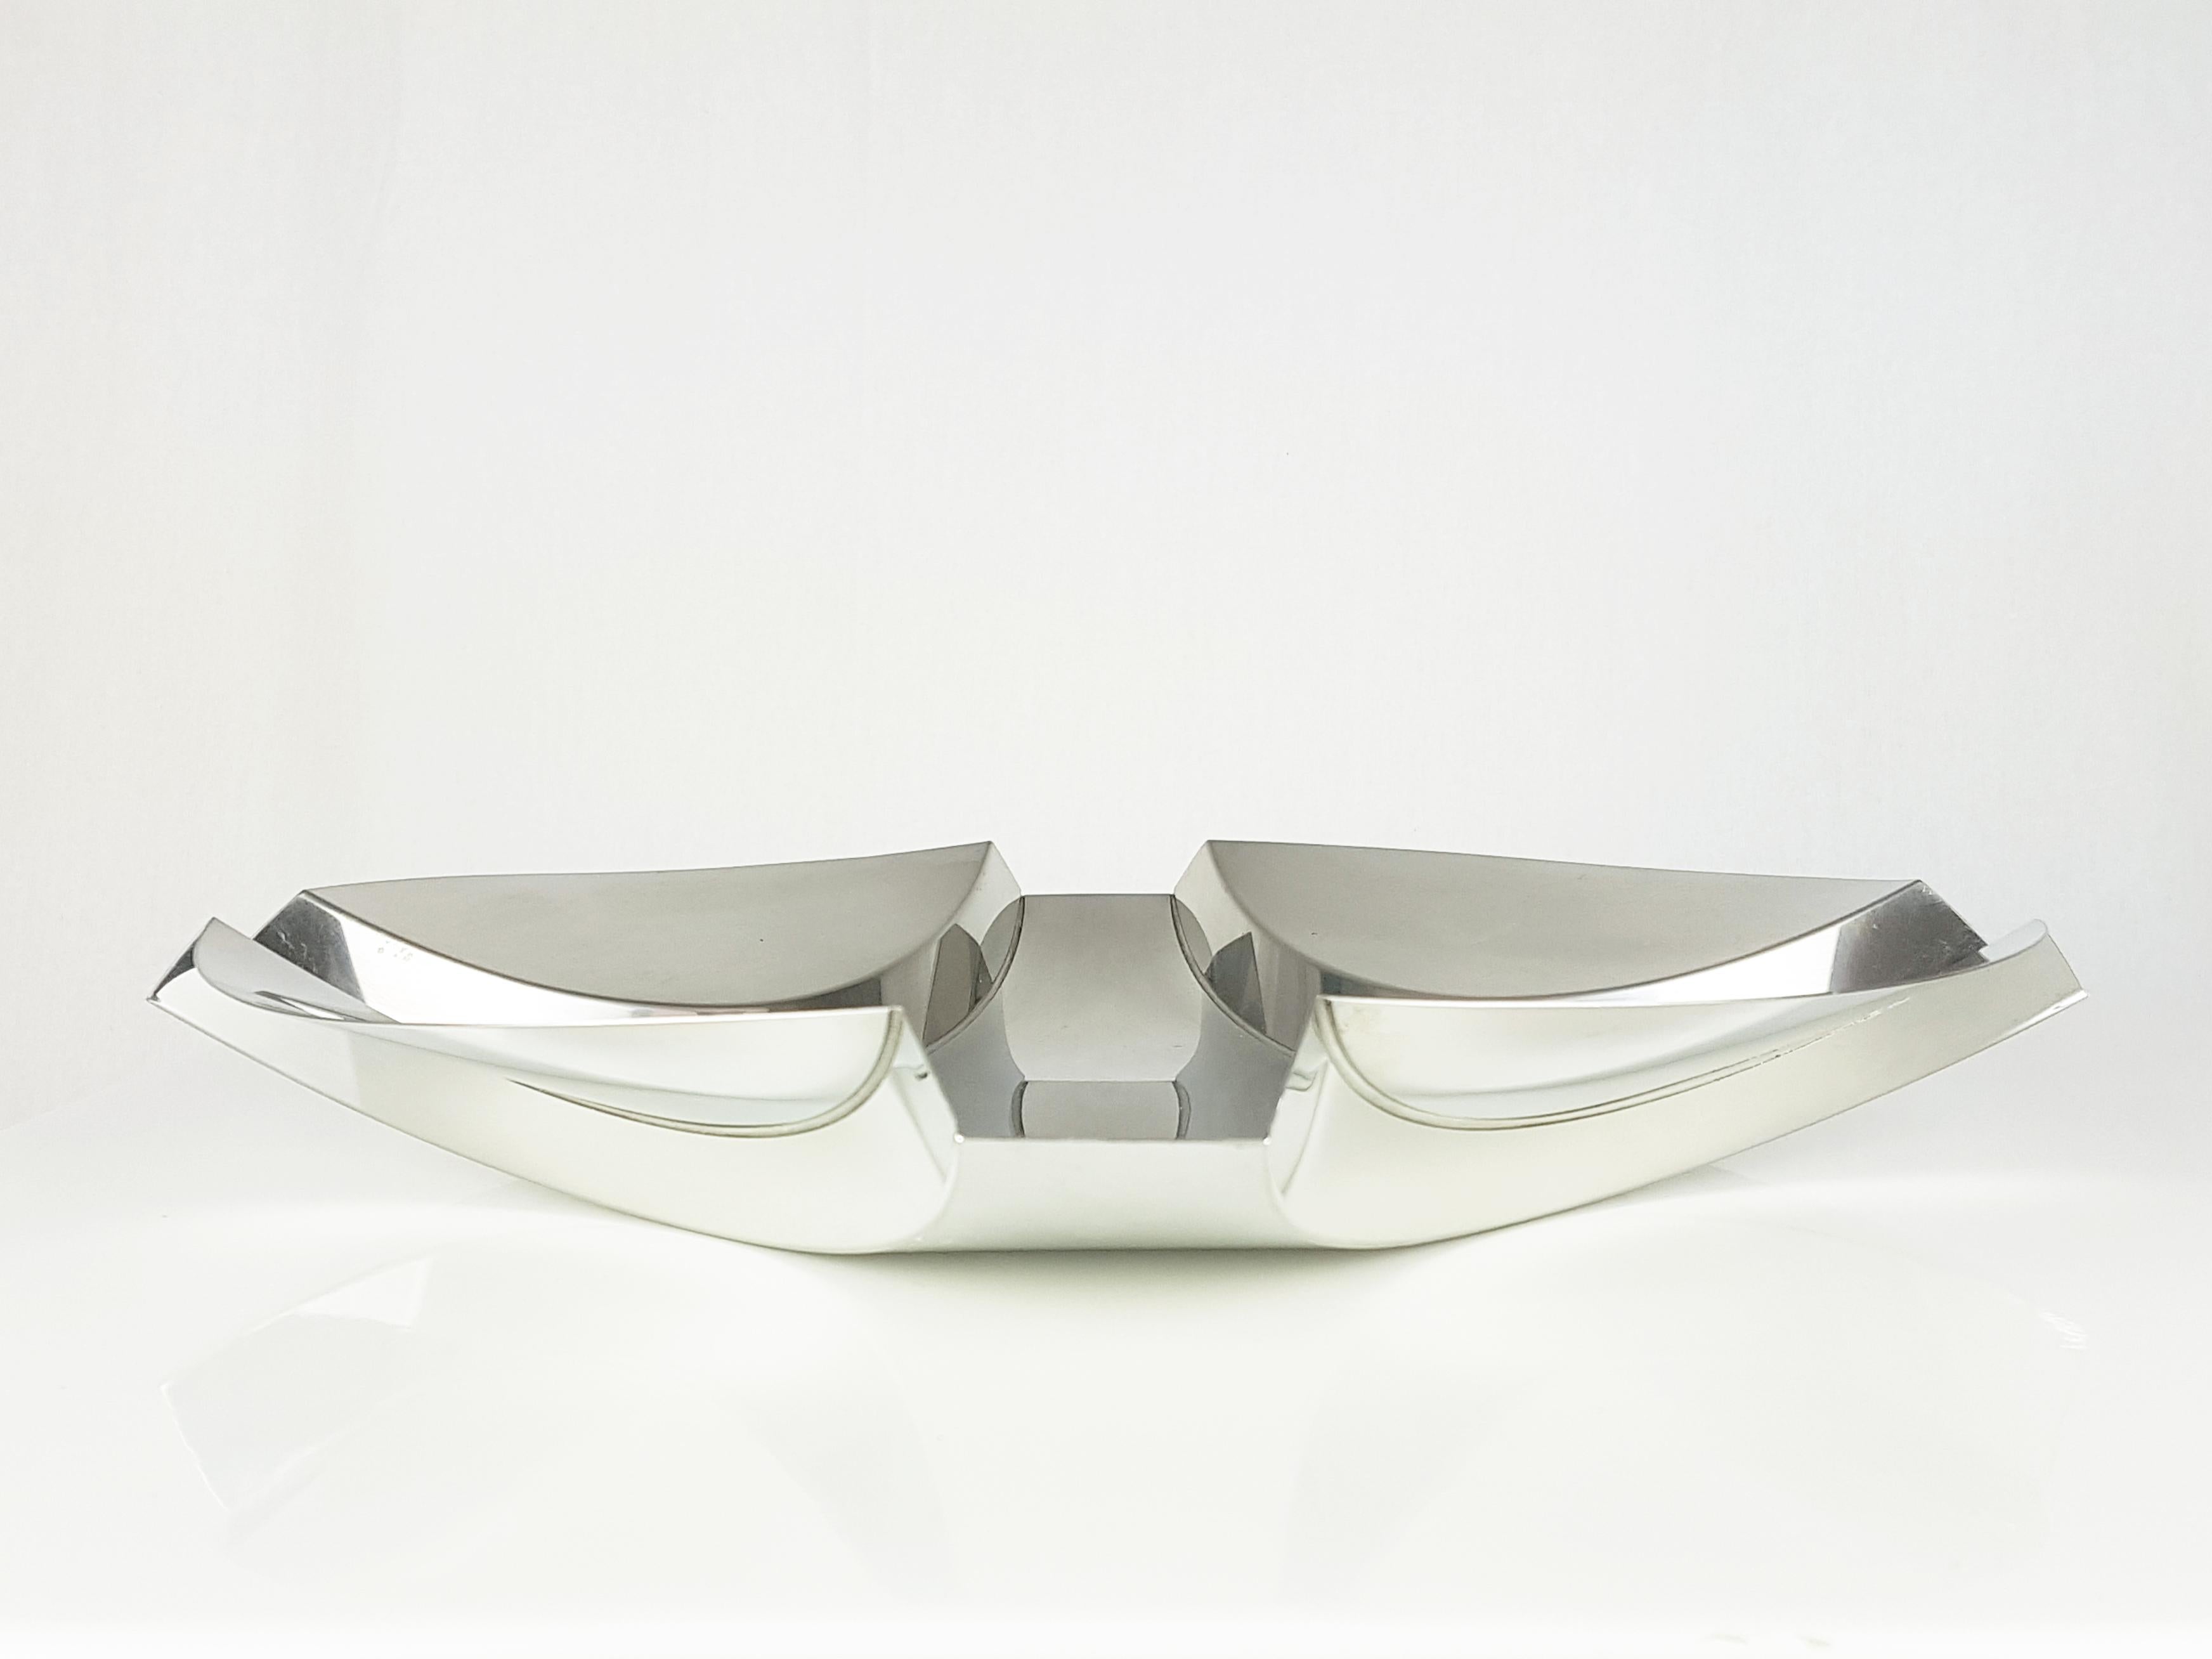 Metalwork Vintage Steel Centerpiece by A. Panzeri for Robots Milano, 1970s For Sale